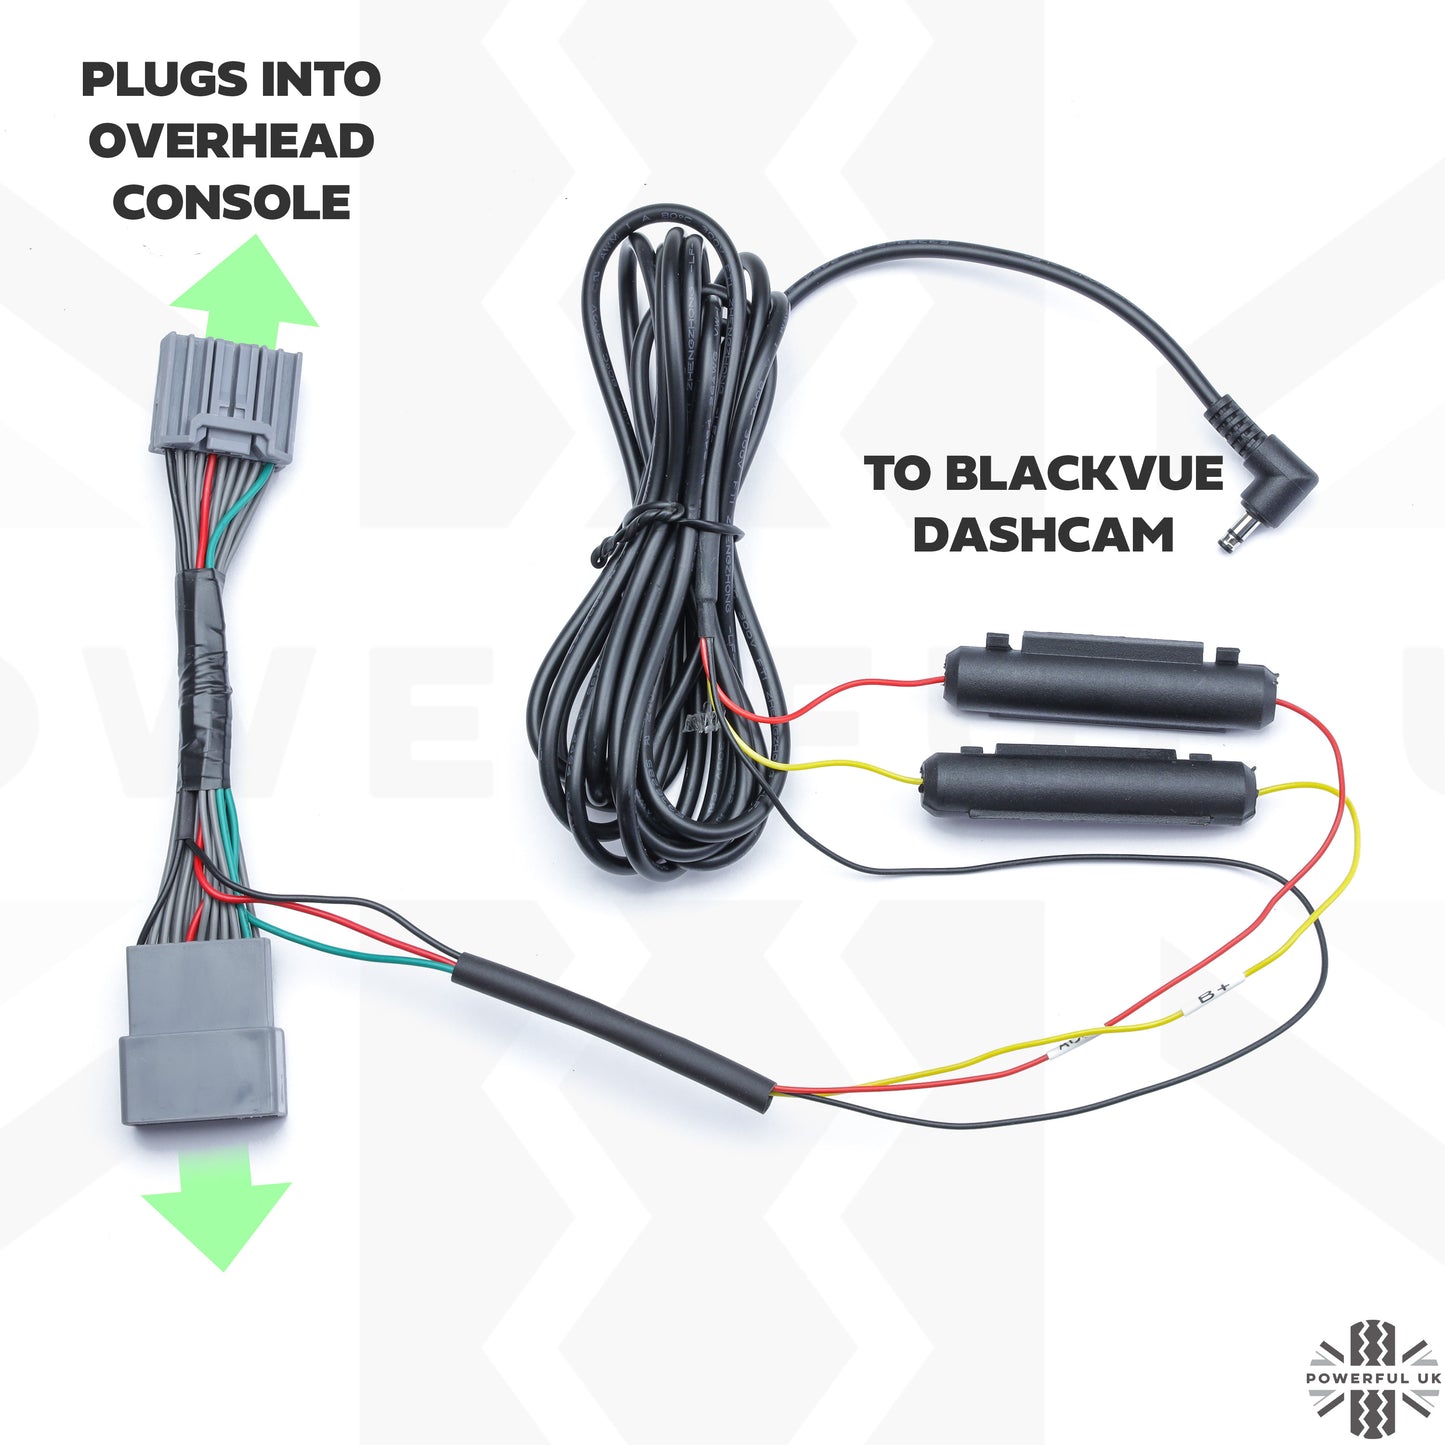 Hardwire Kit for Blackvue Dashcam for Range Rover Evoque 1 with LATE overhead console (2014+)